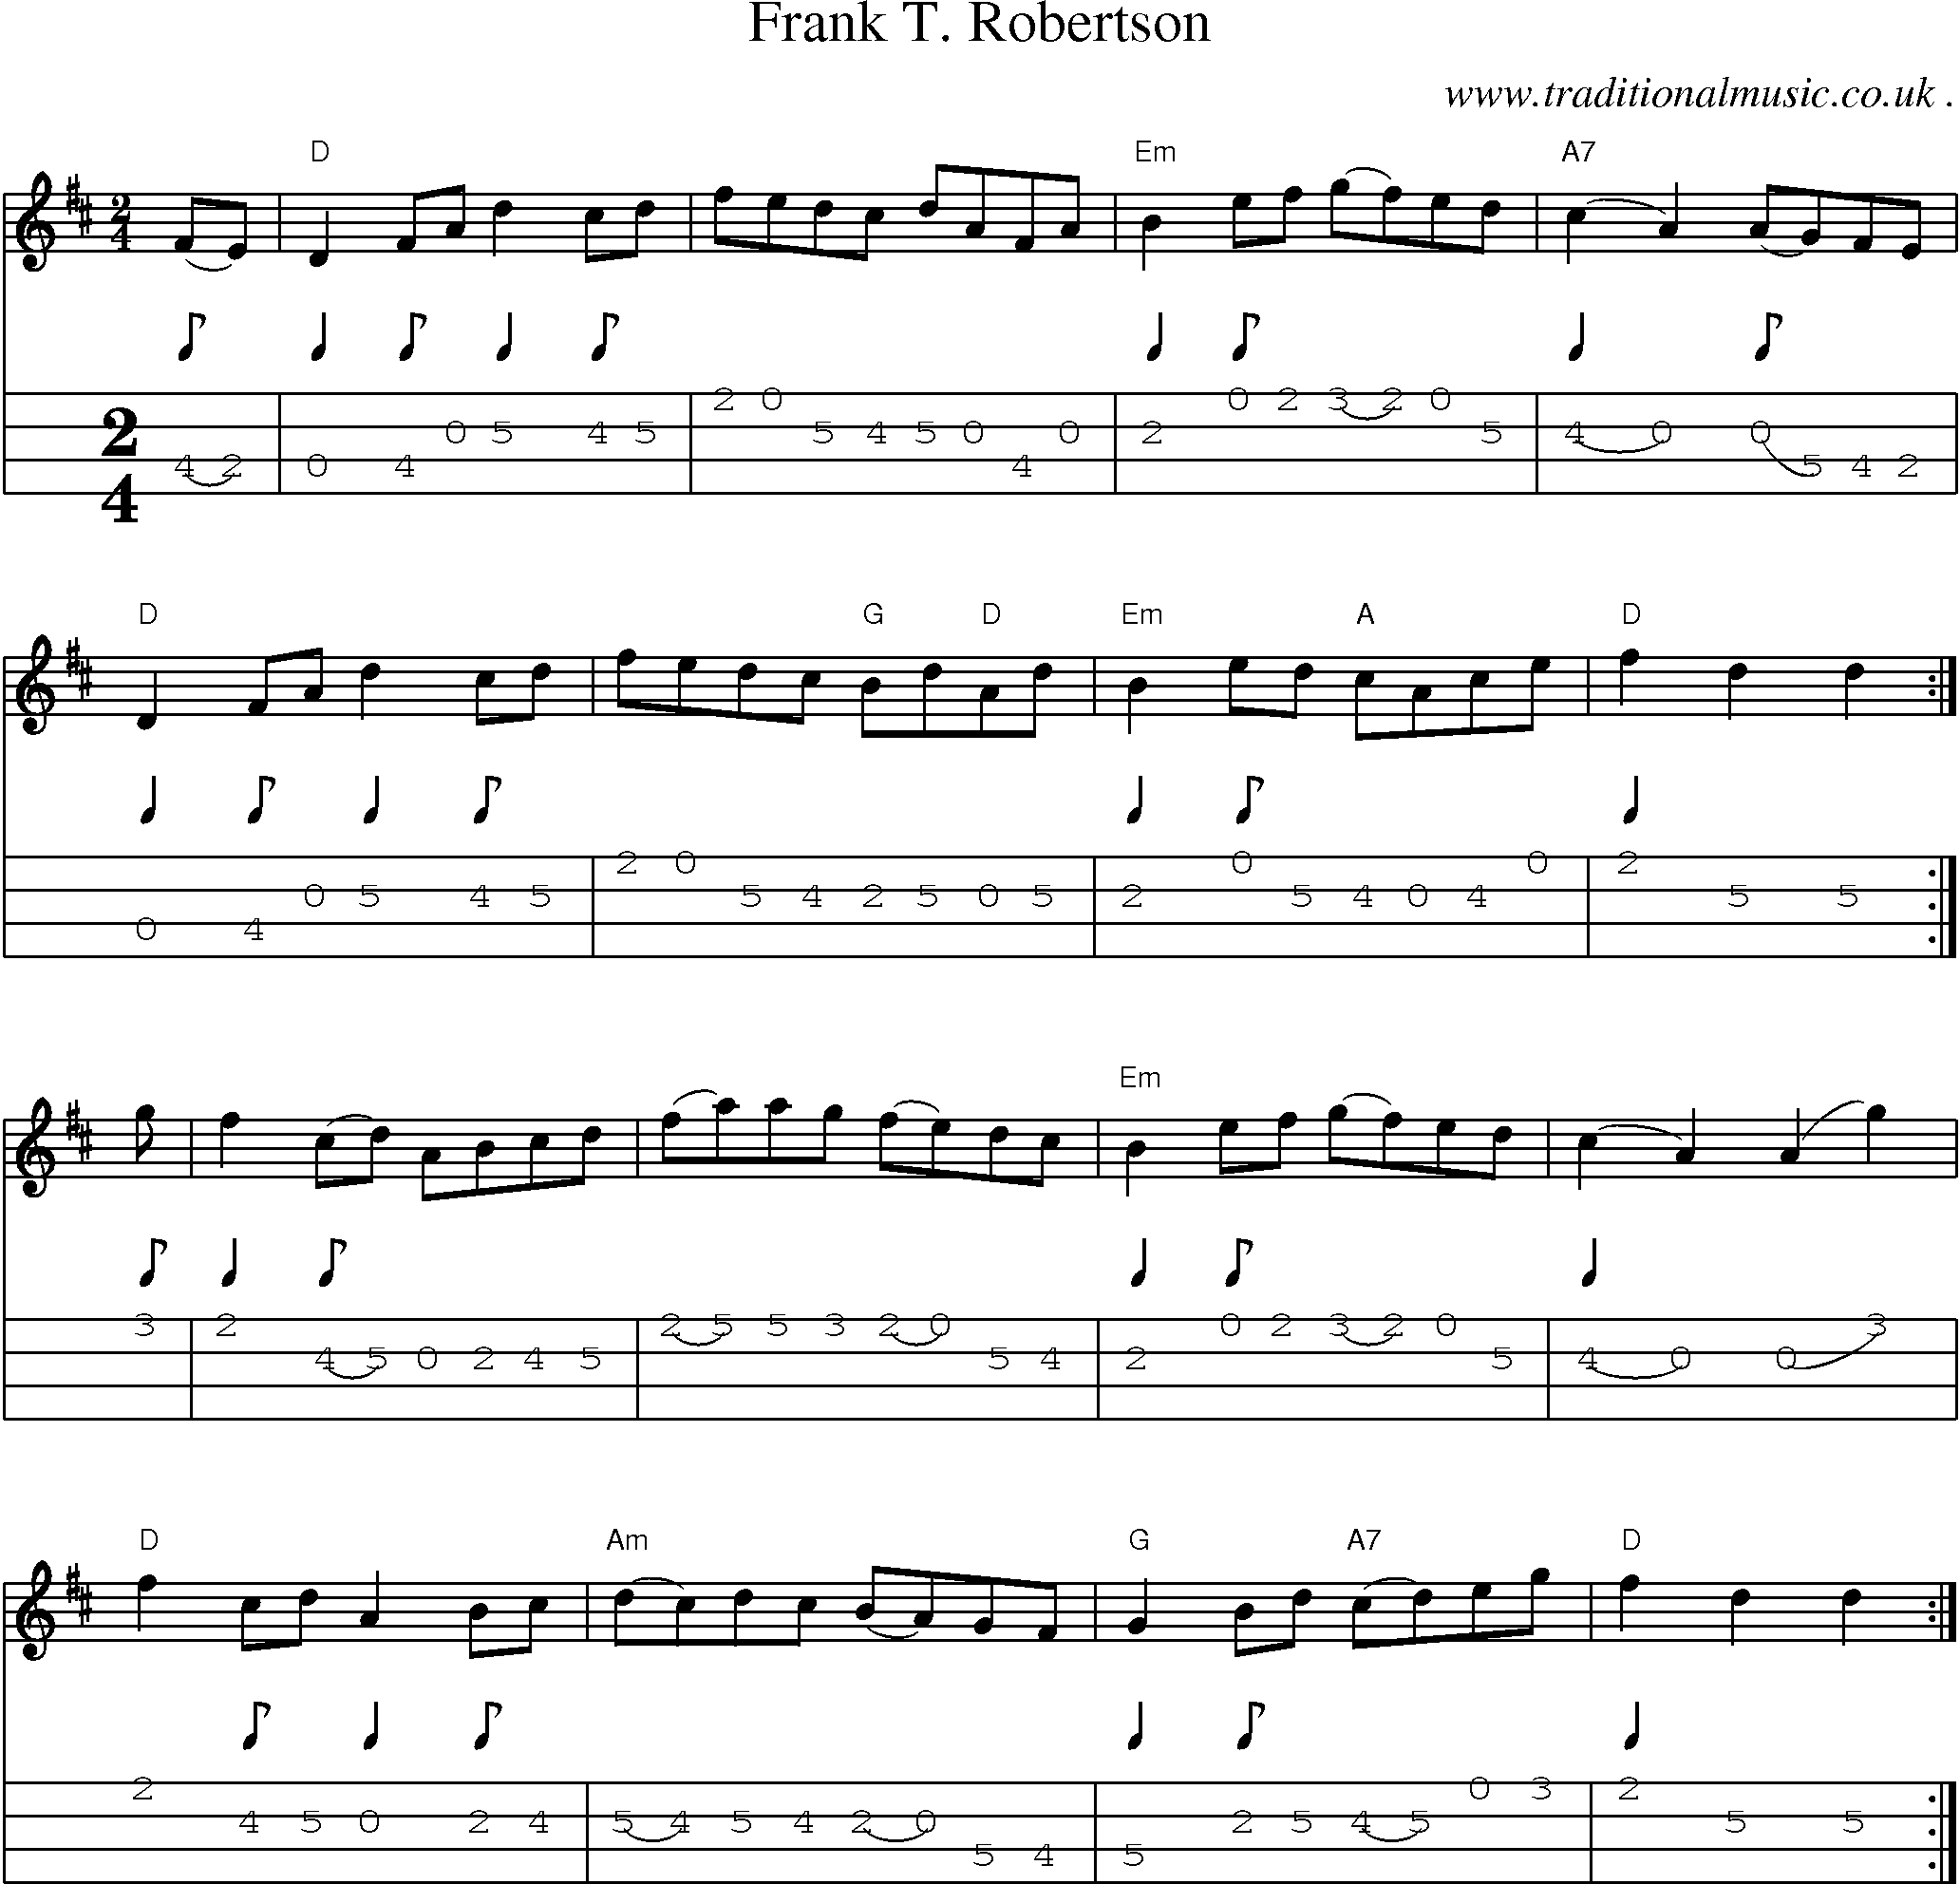 Sheet-music  score, Chords and Mandolin Tabs for Frank T Robertson